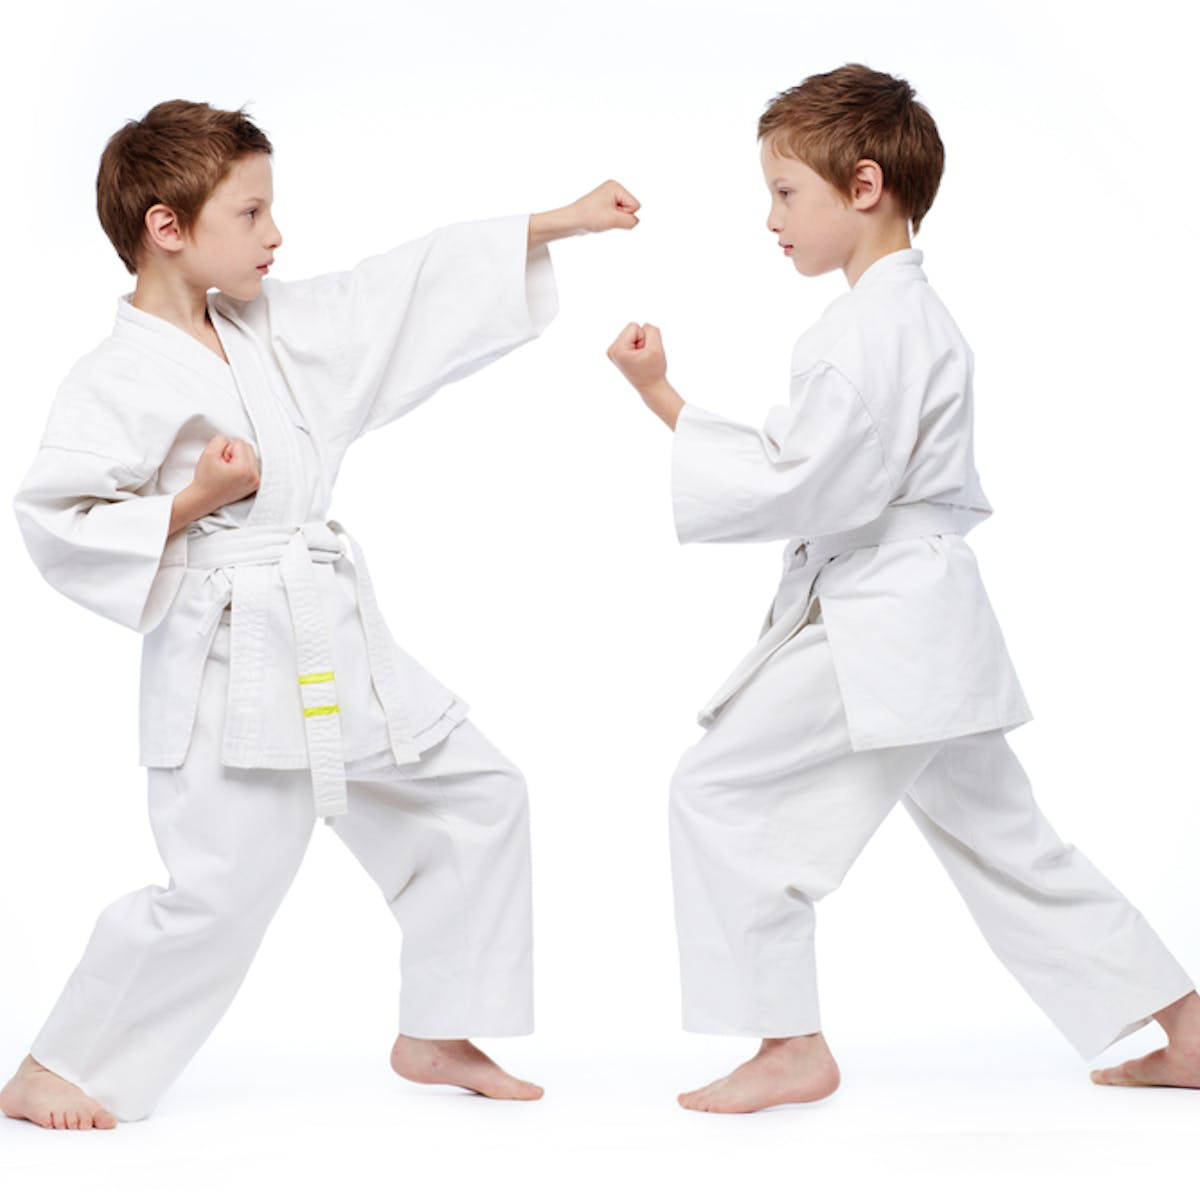 Young Karate Kids in Action Wallpaper